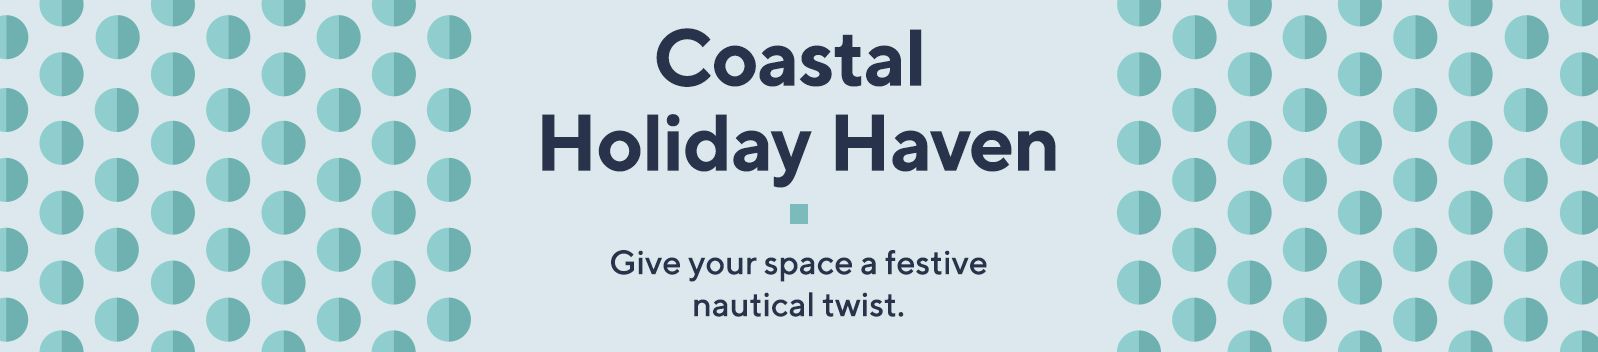 Coastal Holiday Haven   Give your space a festive nautical twist.